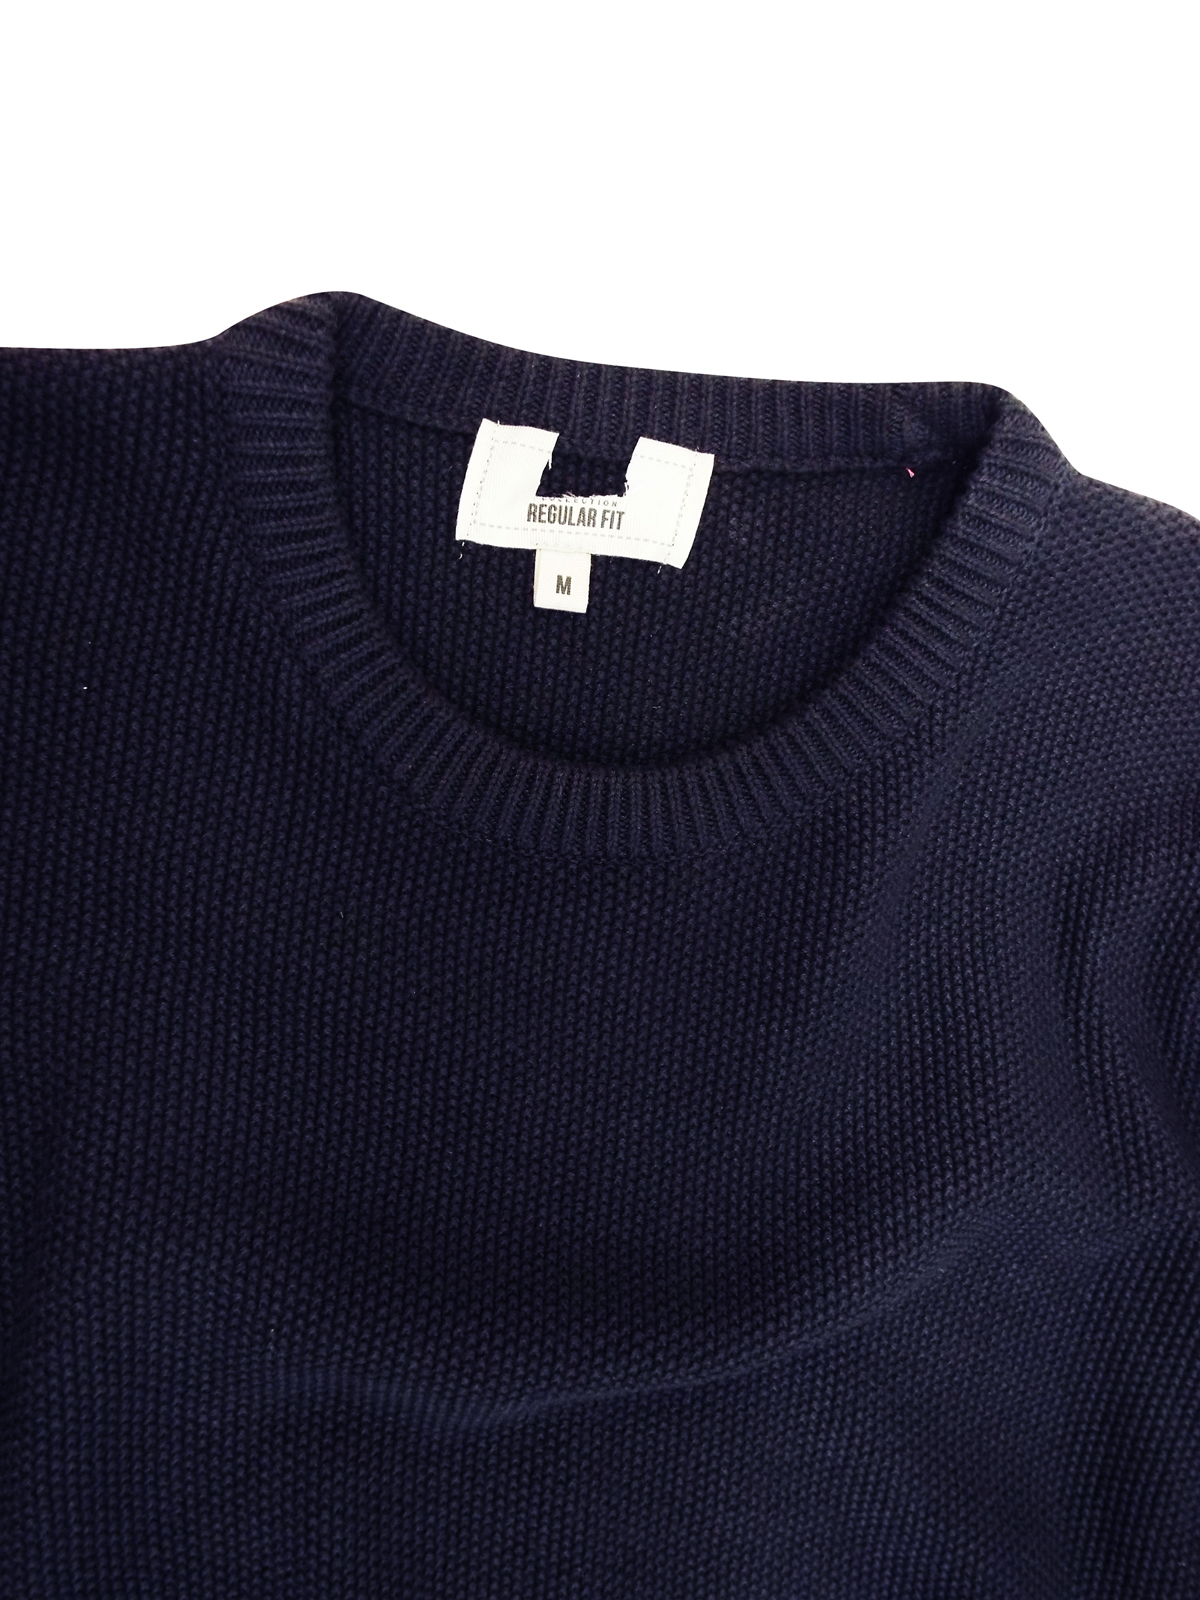 Marks and Spencer - - M&5 NAVY Pure Cotton Textured Jumper - Size ...